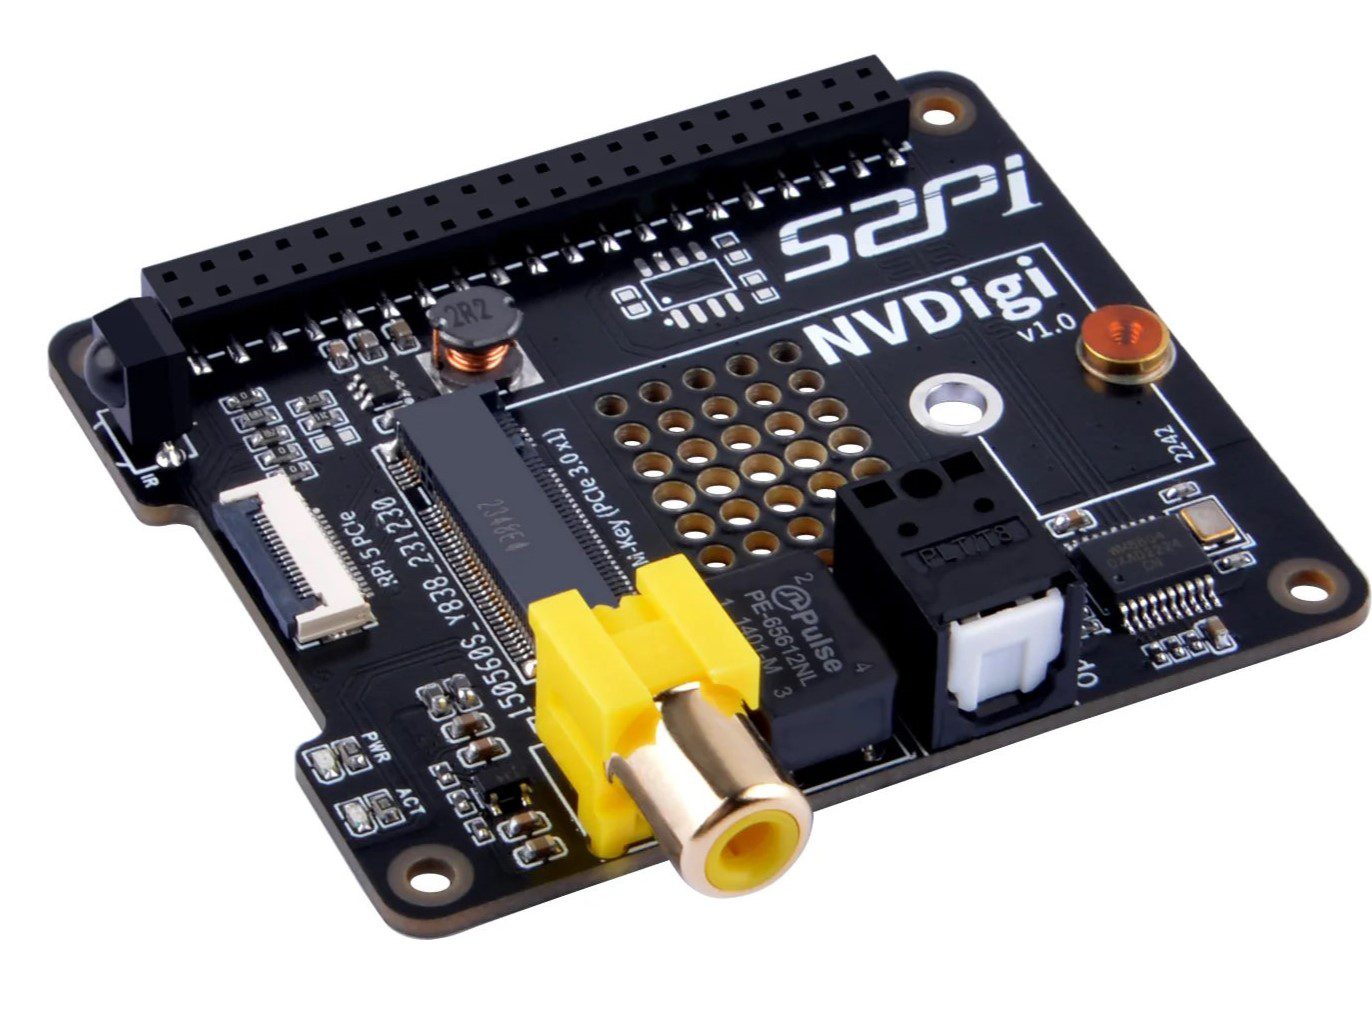 52Pi NVdigi: New expansion board for the Raspberry Pi with HiFi qualities and M.2 port